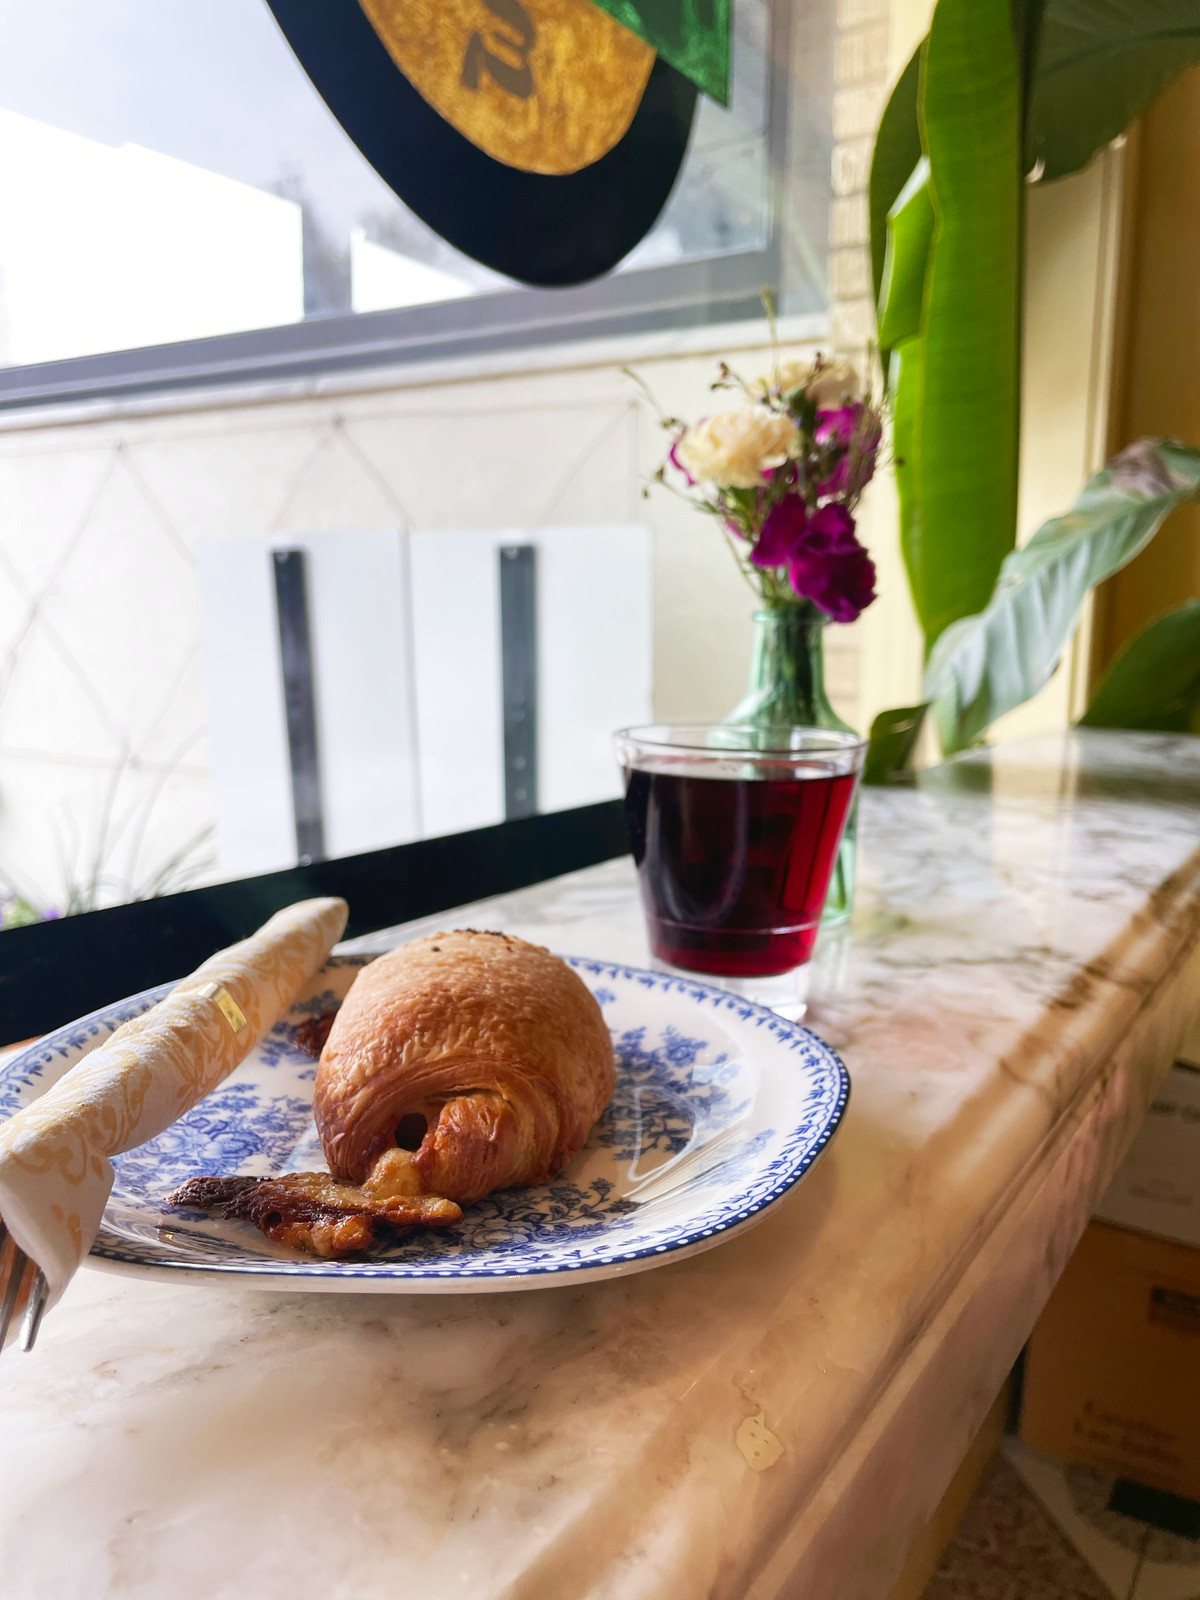 On a marble counter top, a blue and white plate hold a pastry, silverware in a napkin, a tumbler of red wine, and a vase of white and pink flowers.